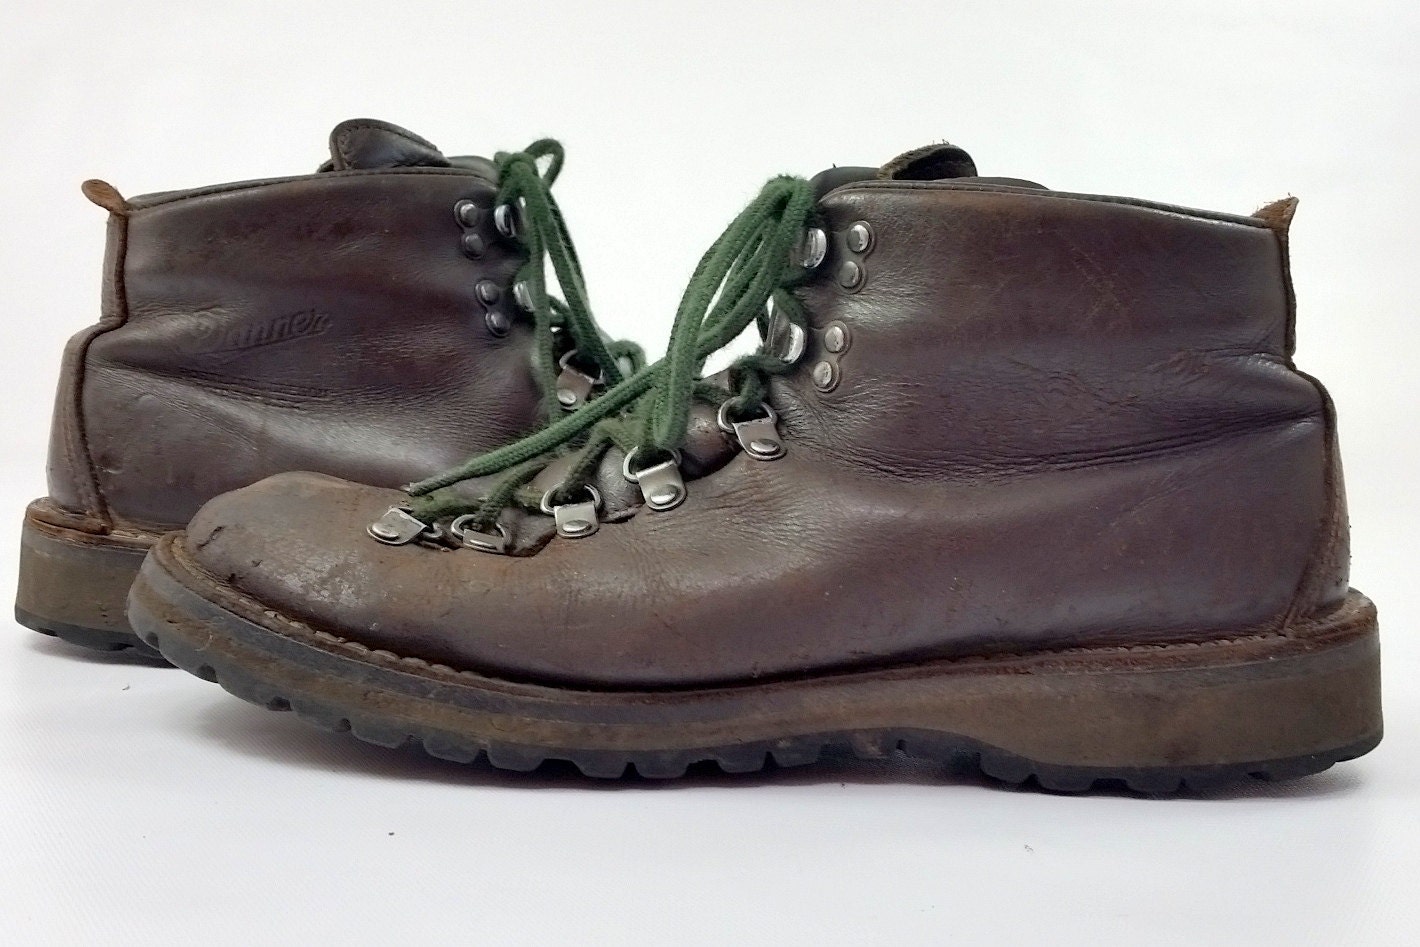 Vintage Danner Mountaineer Hiking Boots Mens 11